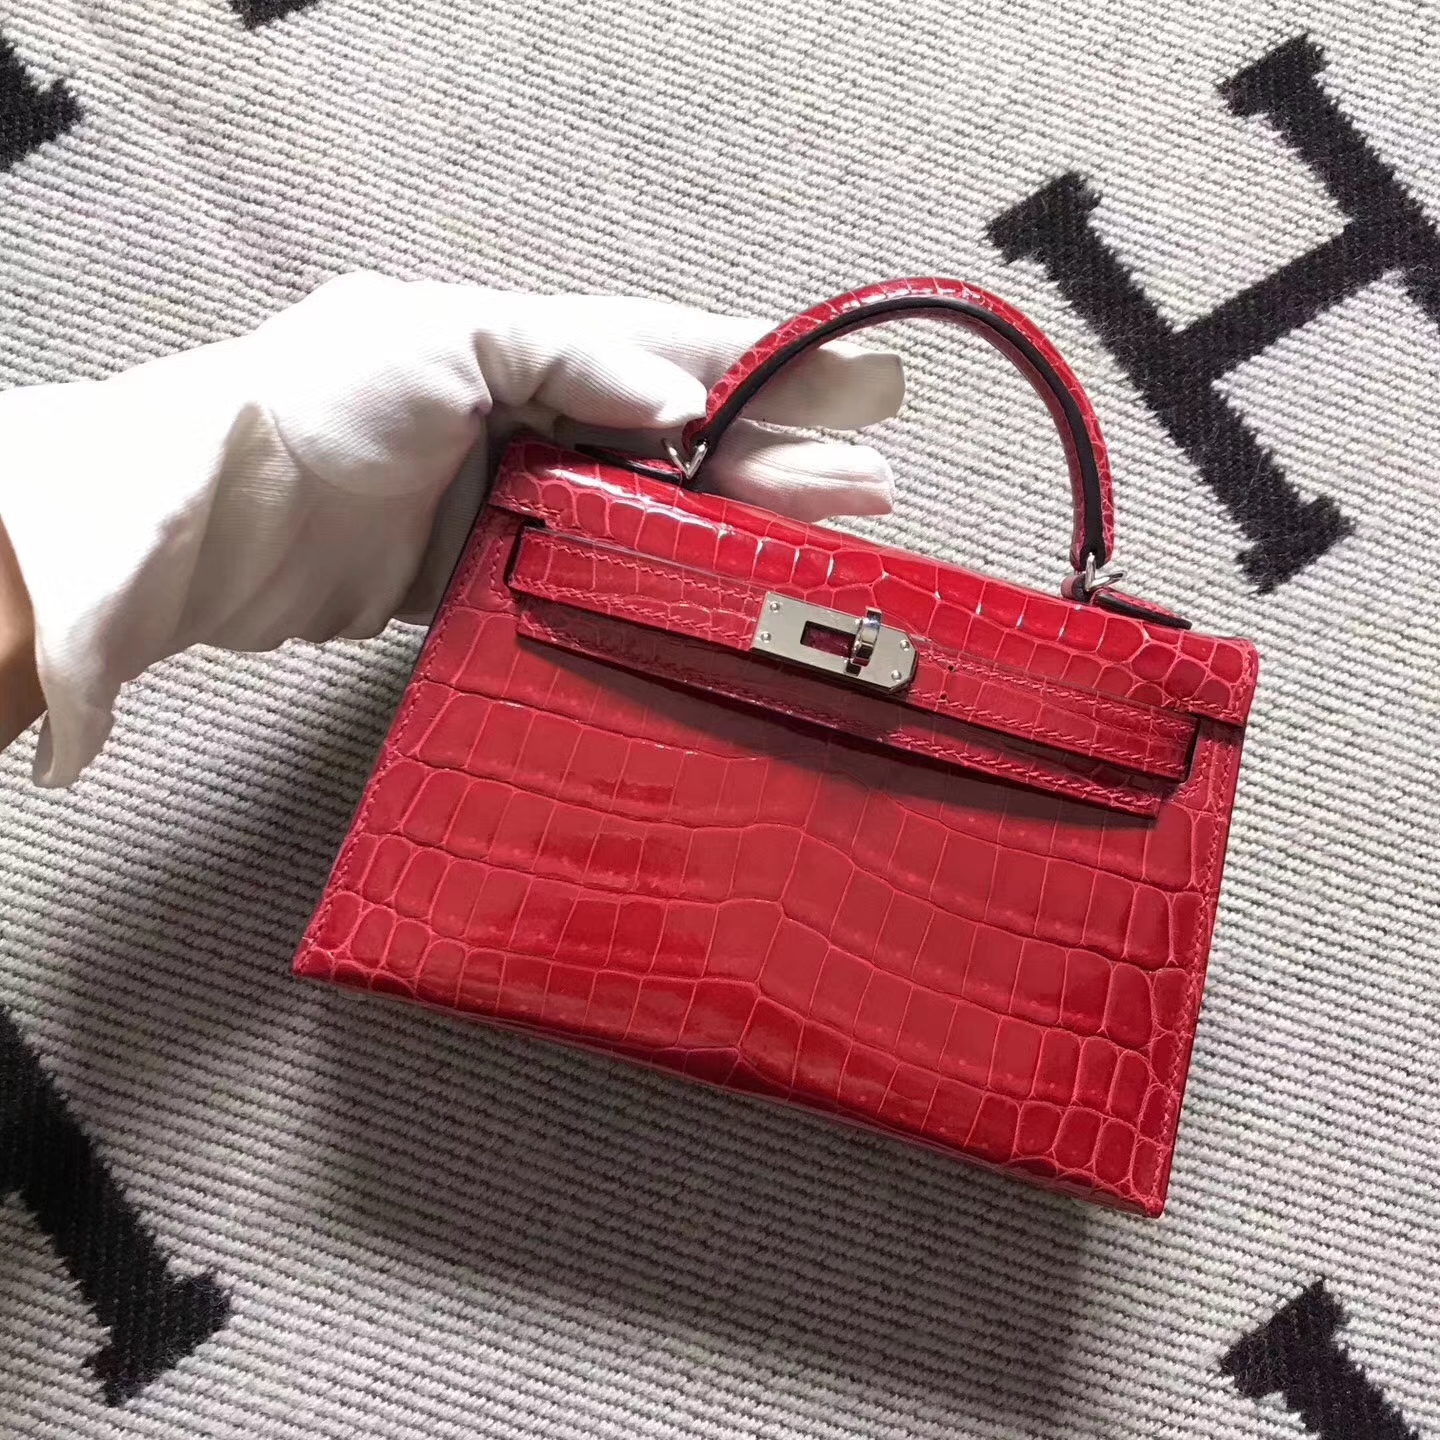 Discount Hermes Red Crocodile Shiny Leather Minikelly-2 Evening Bag Clutch Bag